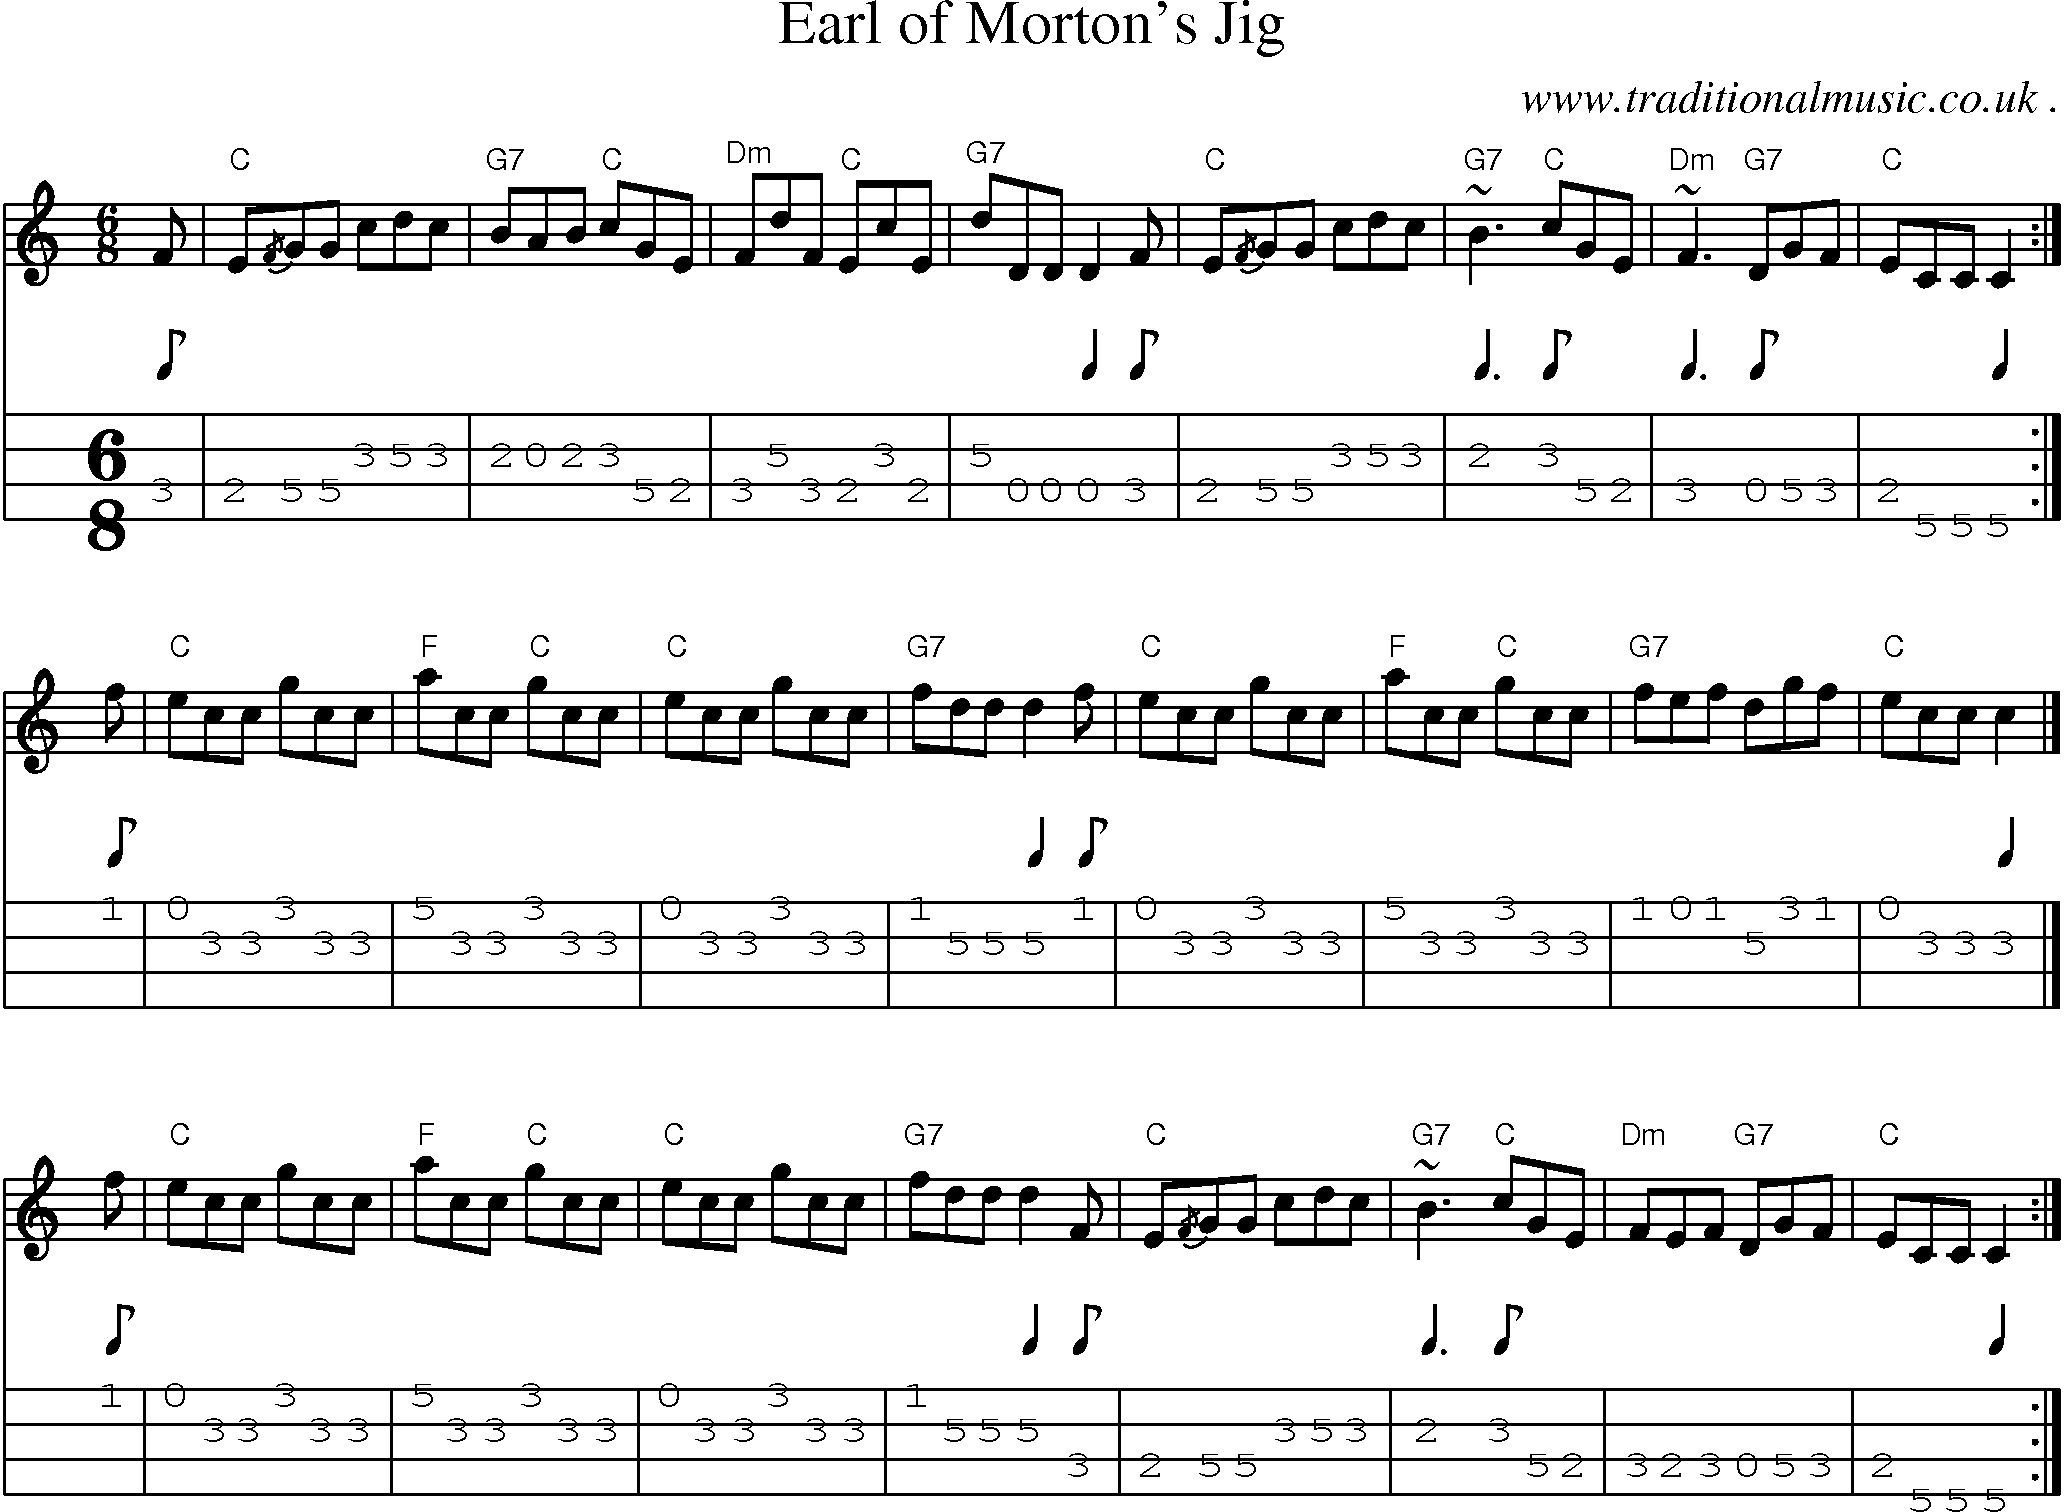 Sheet-music  score, Chords and Mandolin Tabs for Earl Of Mortons Jig